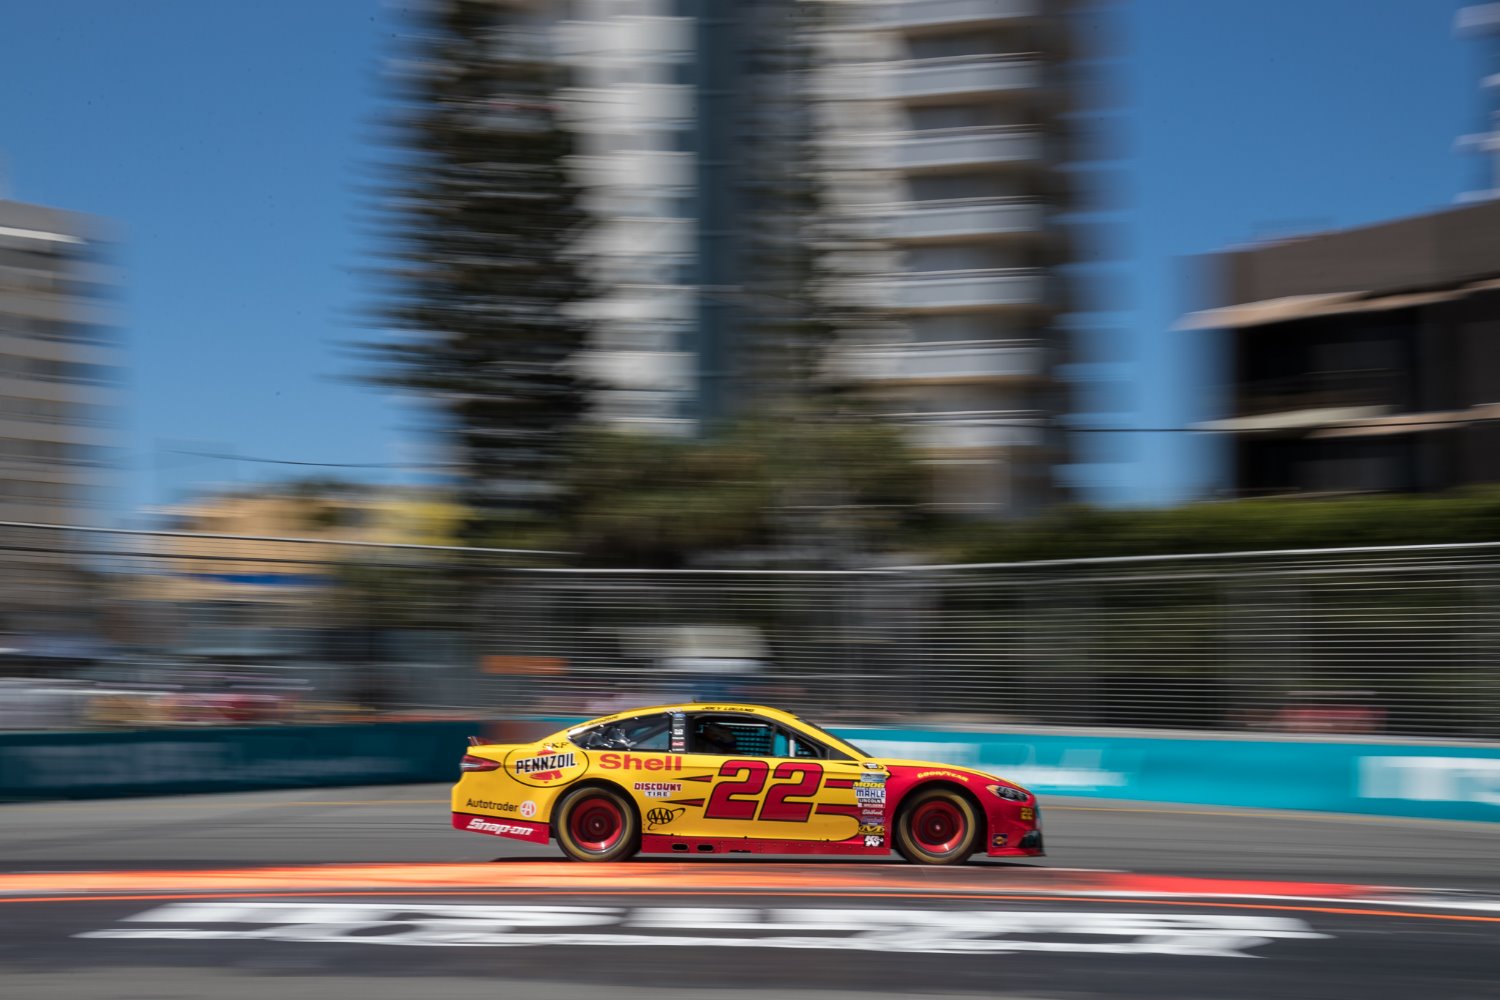 Penske sending his NASCAR car to Surfers just rubs salt in the wounds of Mark Miles failed international IndyCar ambitions